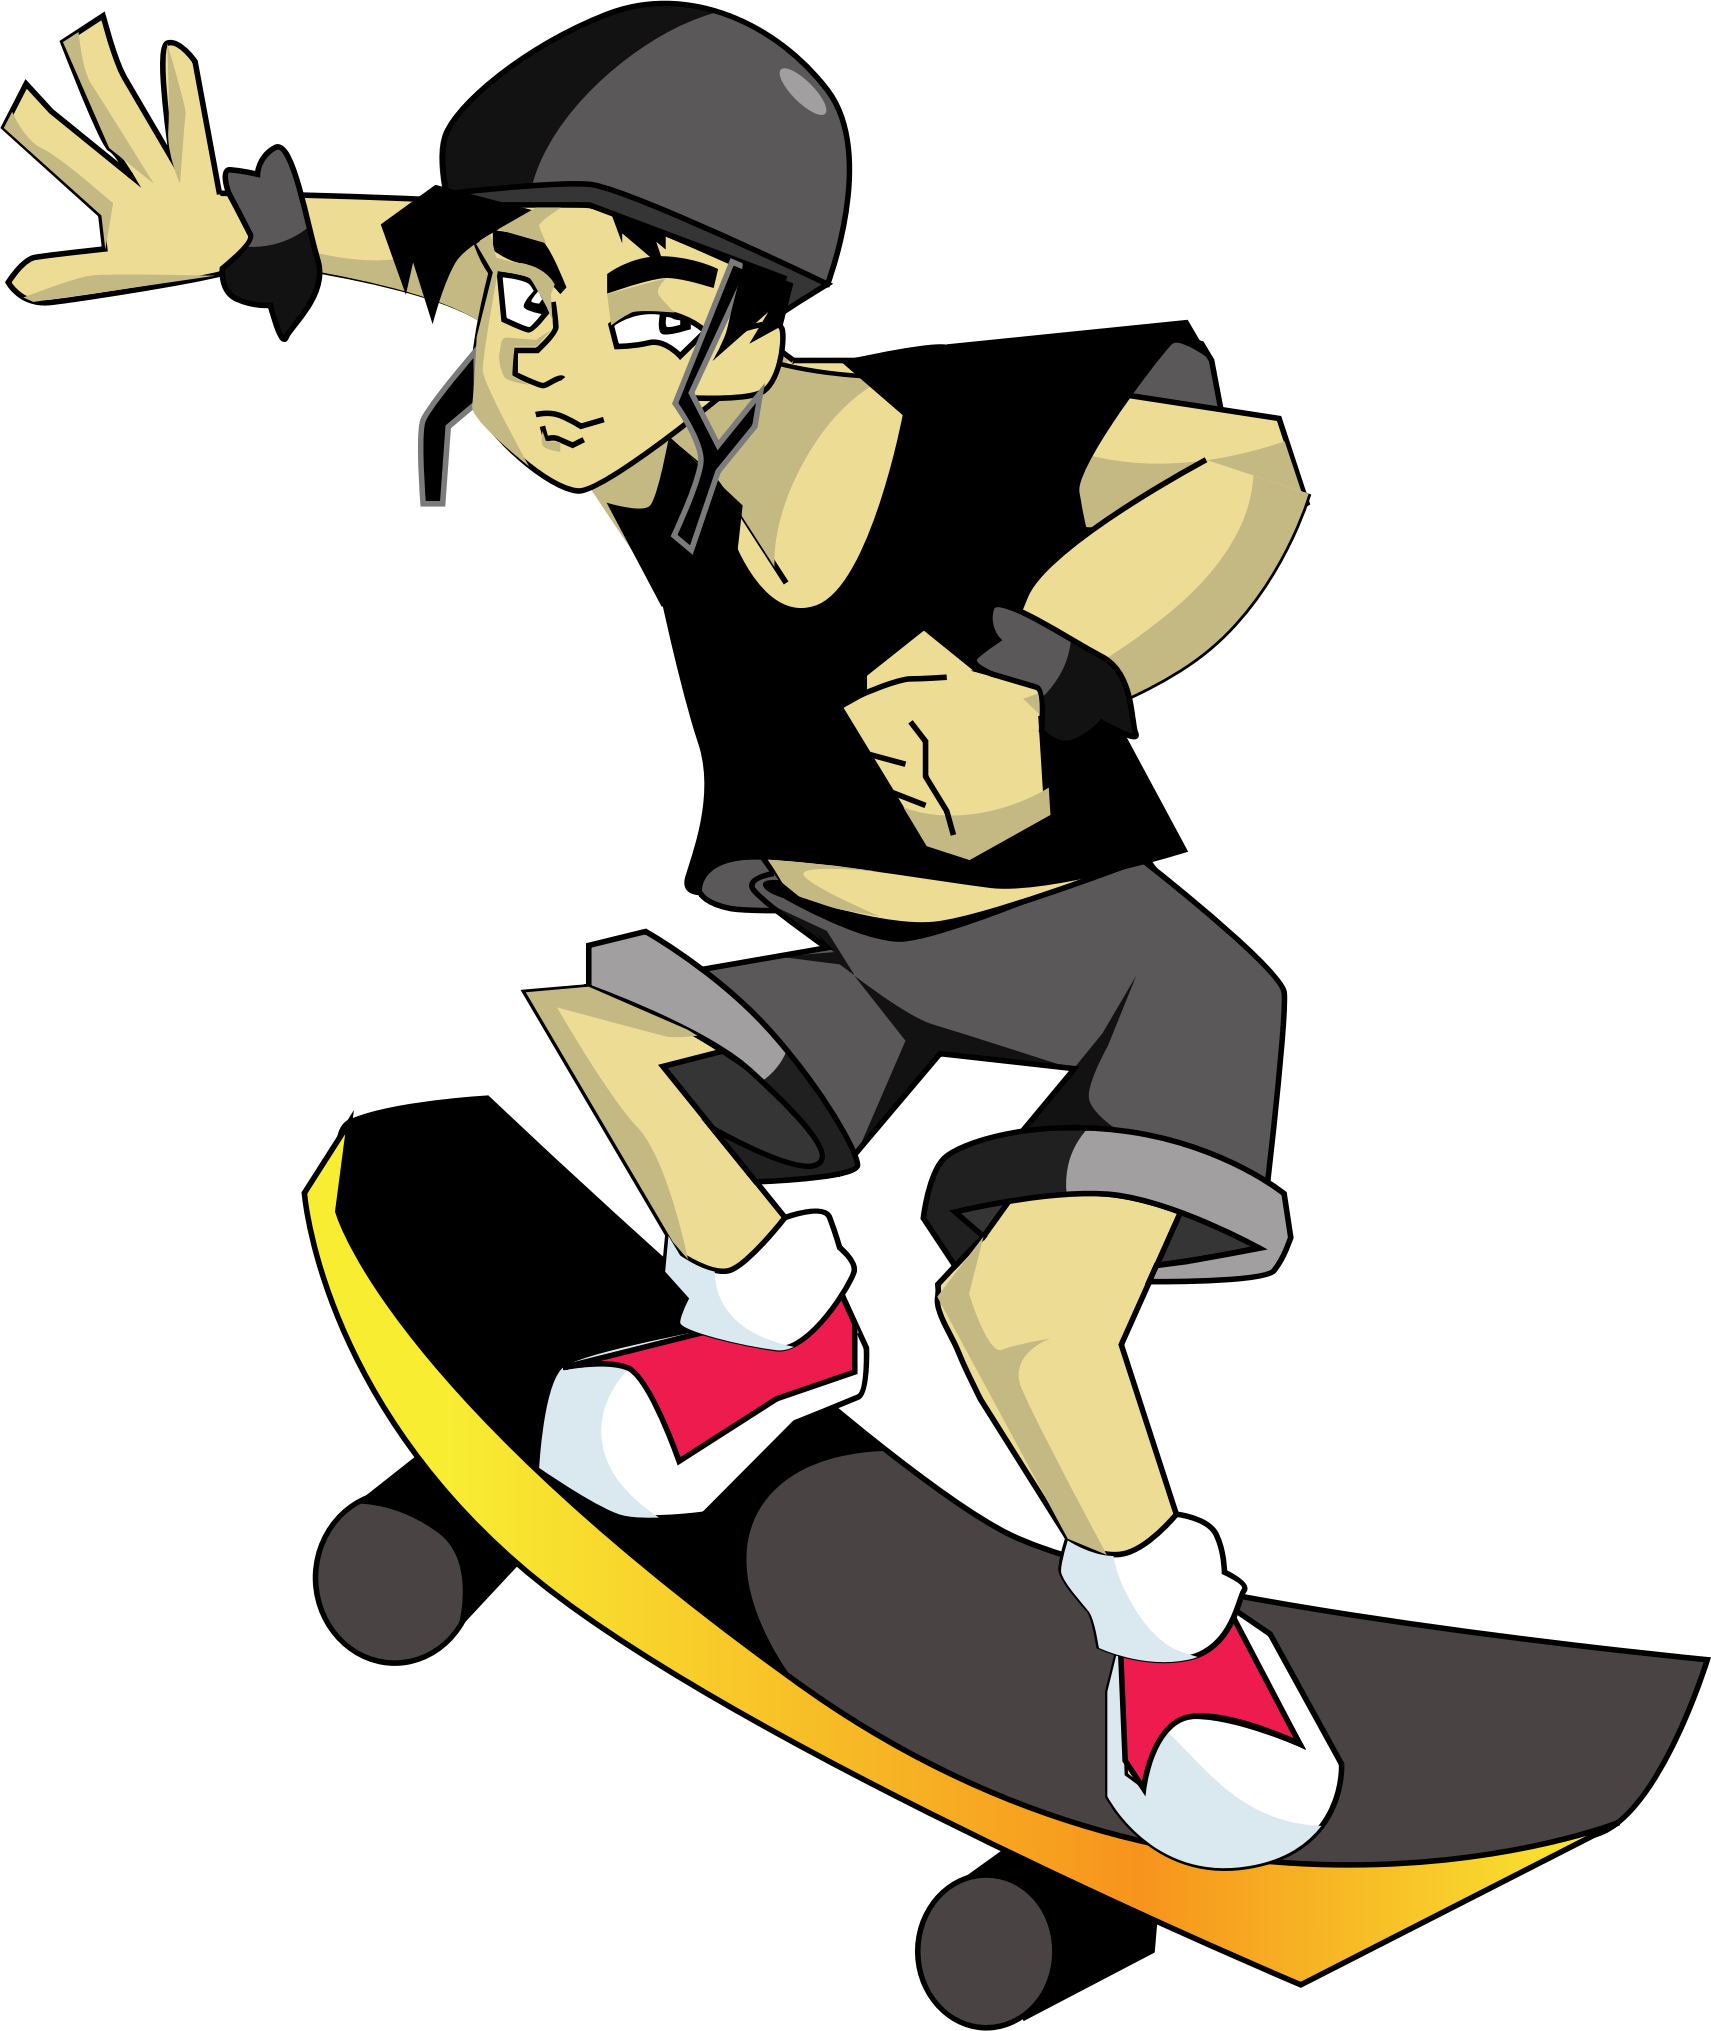 Skater icons png free. Green clipart skateboard